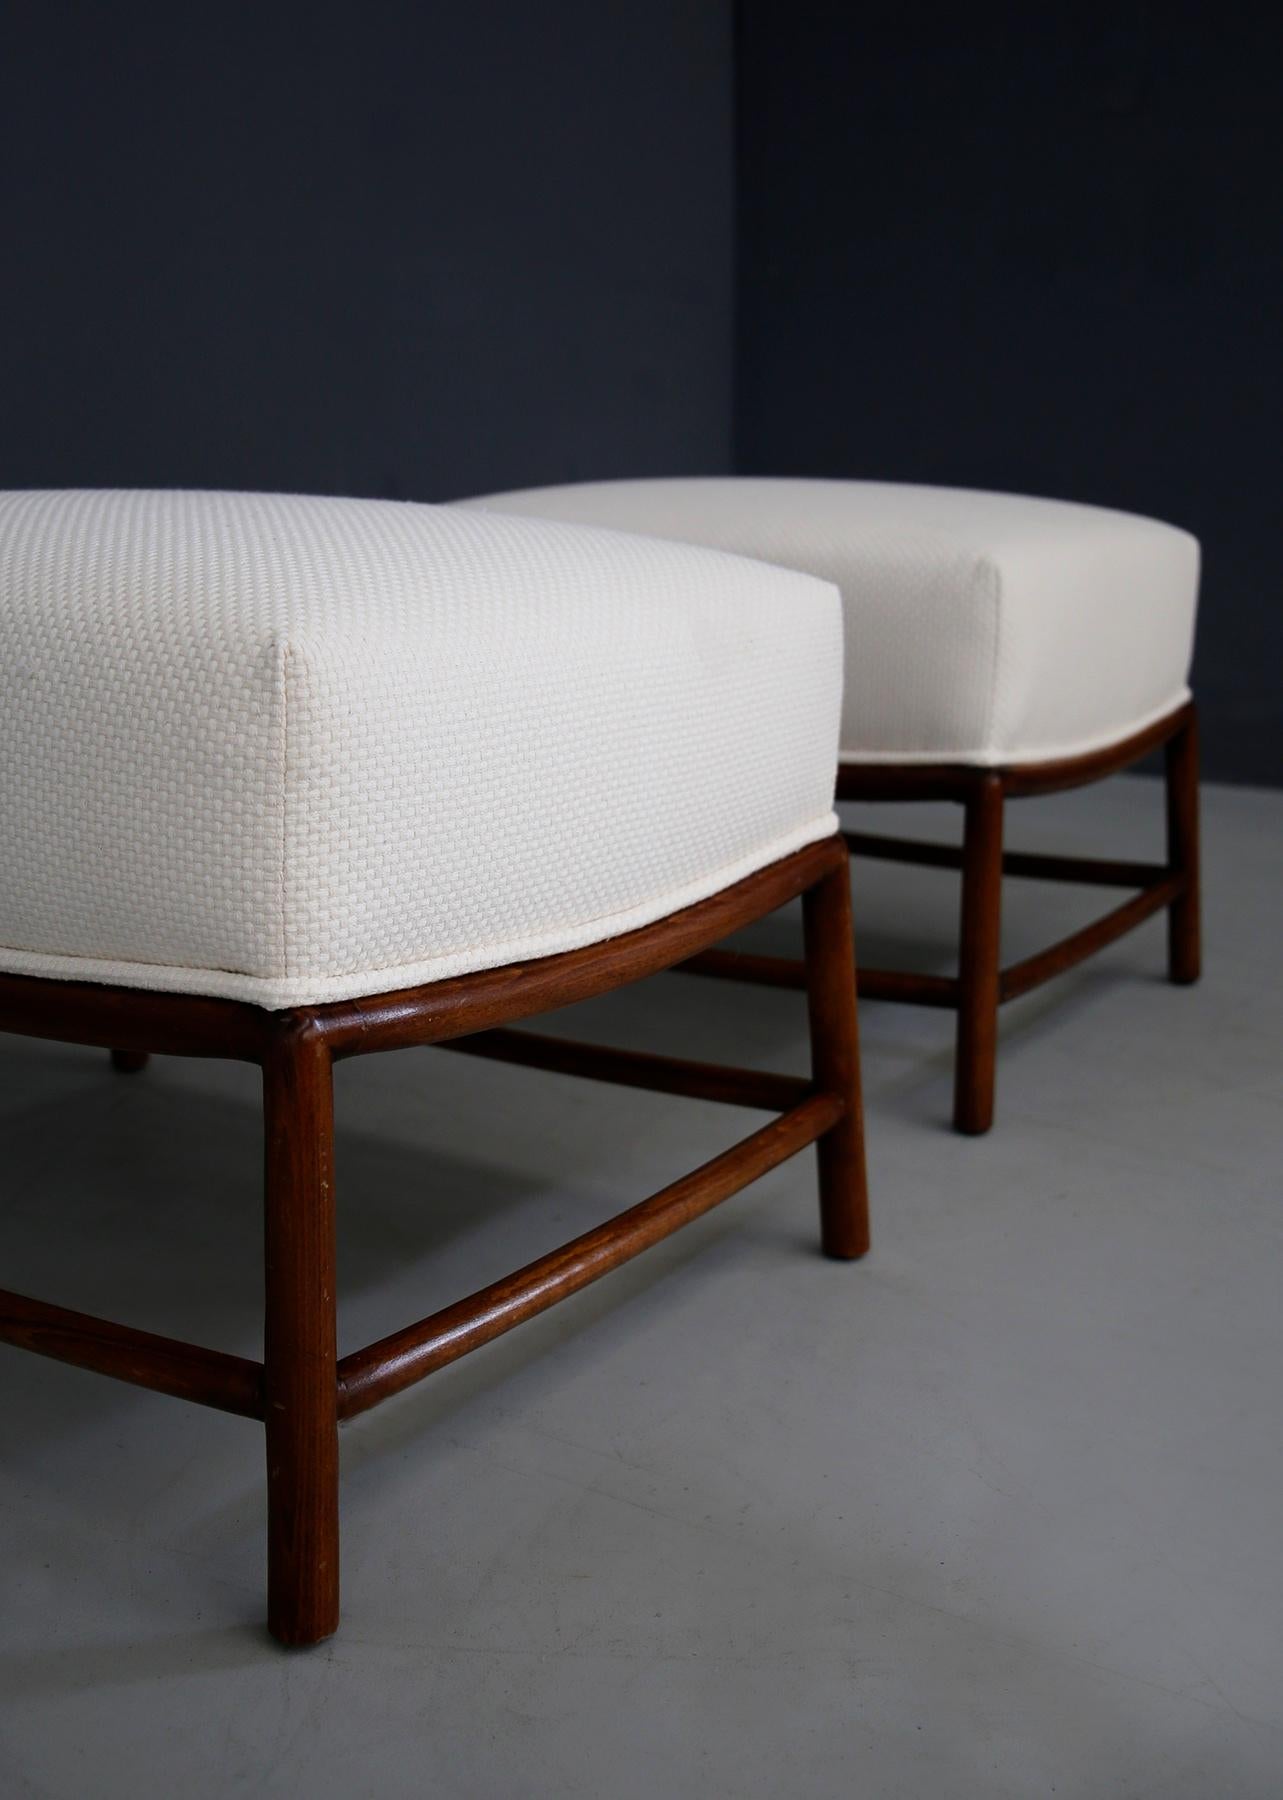 American Pair of white Stools by T.H. Robsjohn-Gibbings in Fabric and Wood Restored 1950s